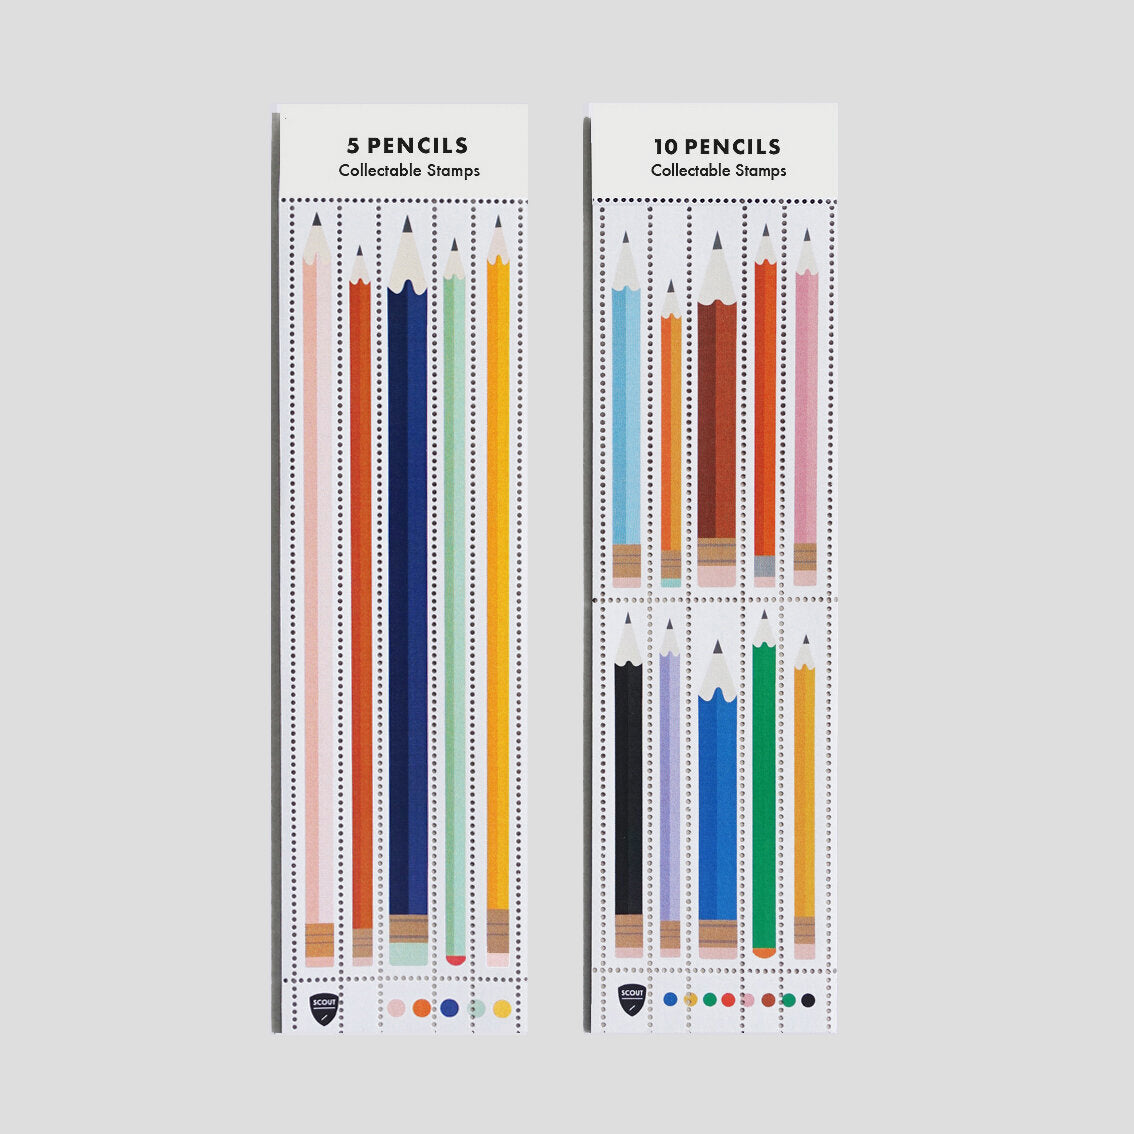 Pencils Collectable Stamps